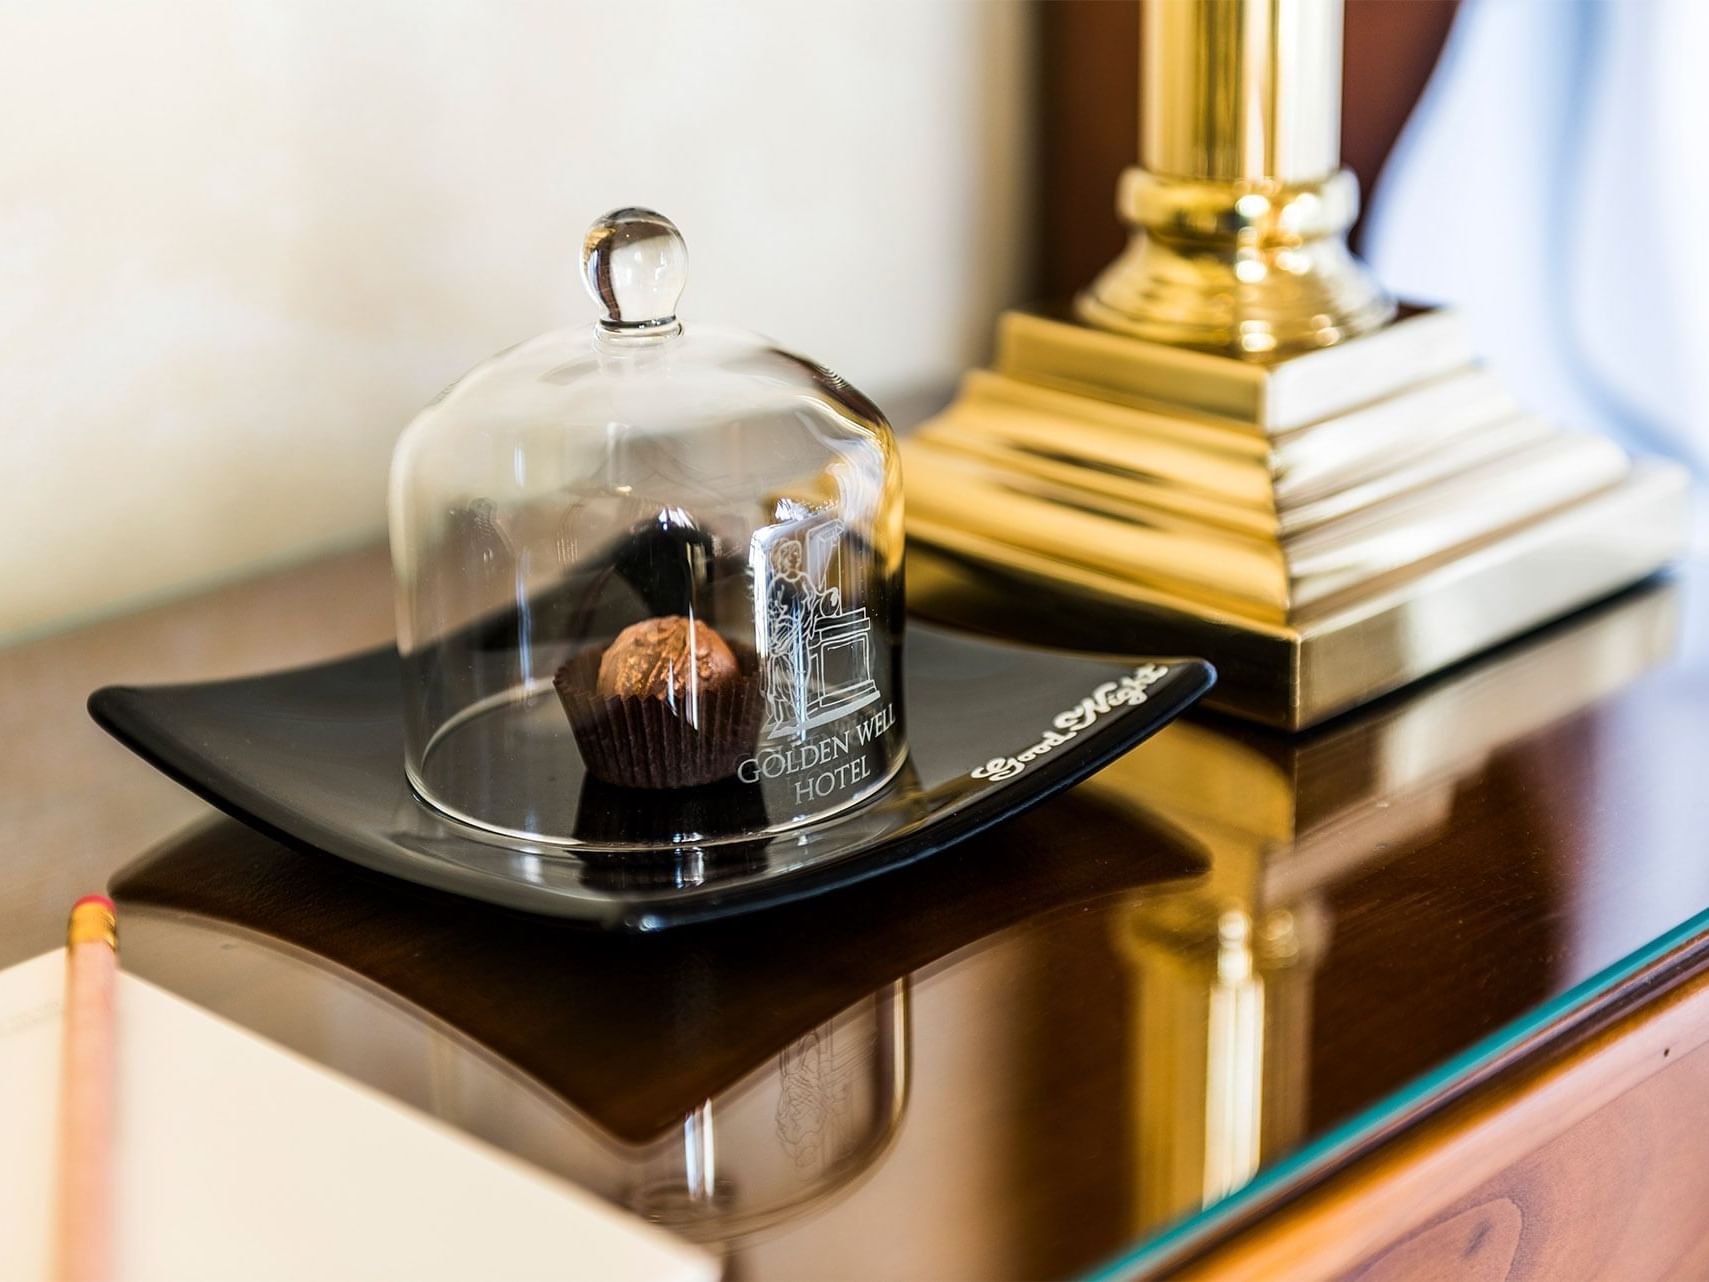 Personalized services at Golden Well Hotel in Prague